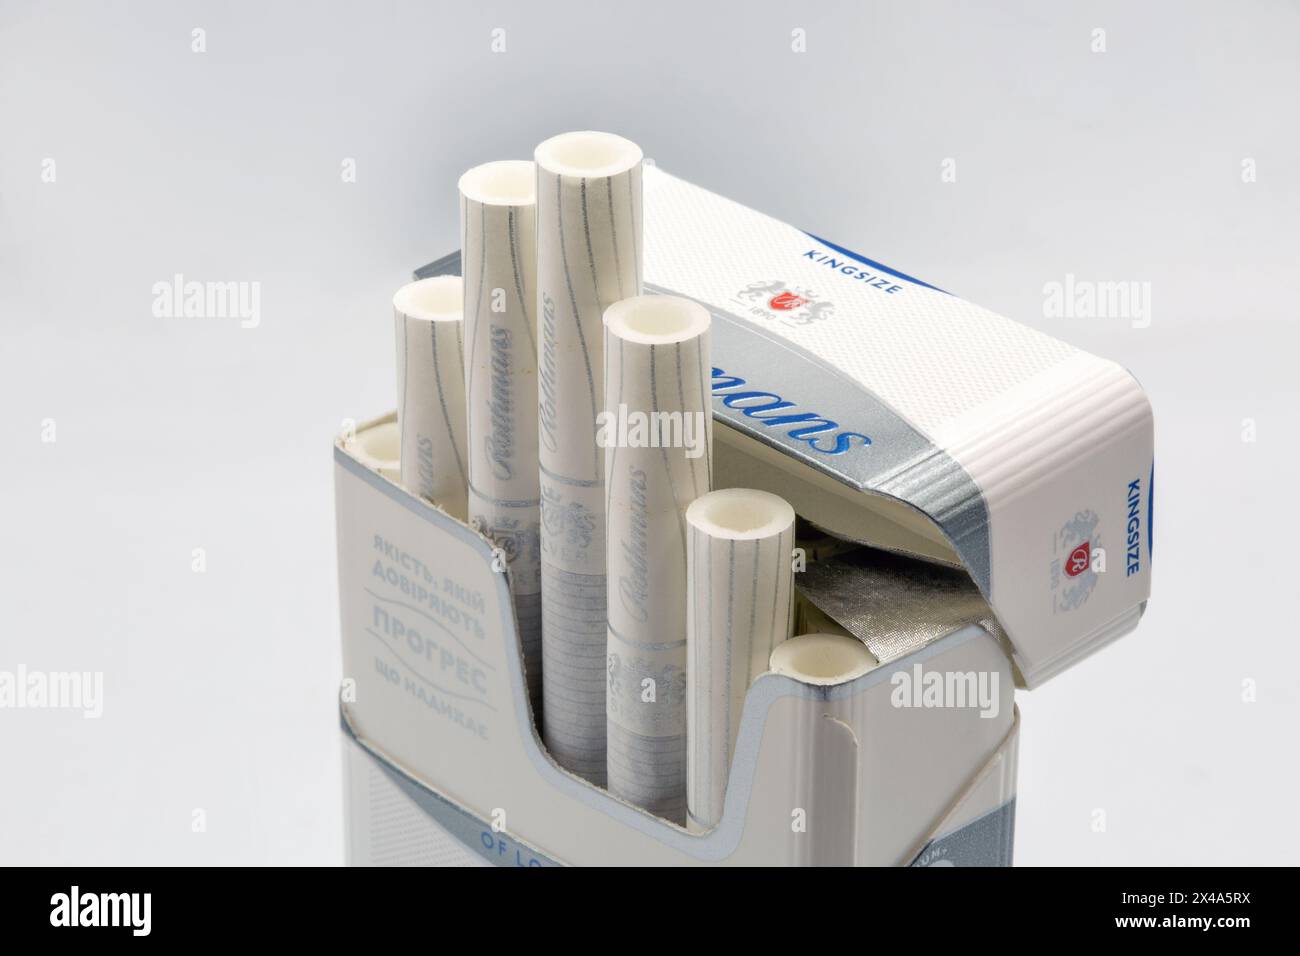 Kyiv, Ukraine - August 05, 2022: A pack of Rothmans cigarettes closeup on white. Rothmans International PLC was a British tobacco manufacturer, it was Stock Photo